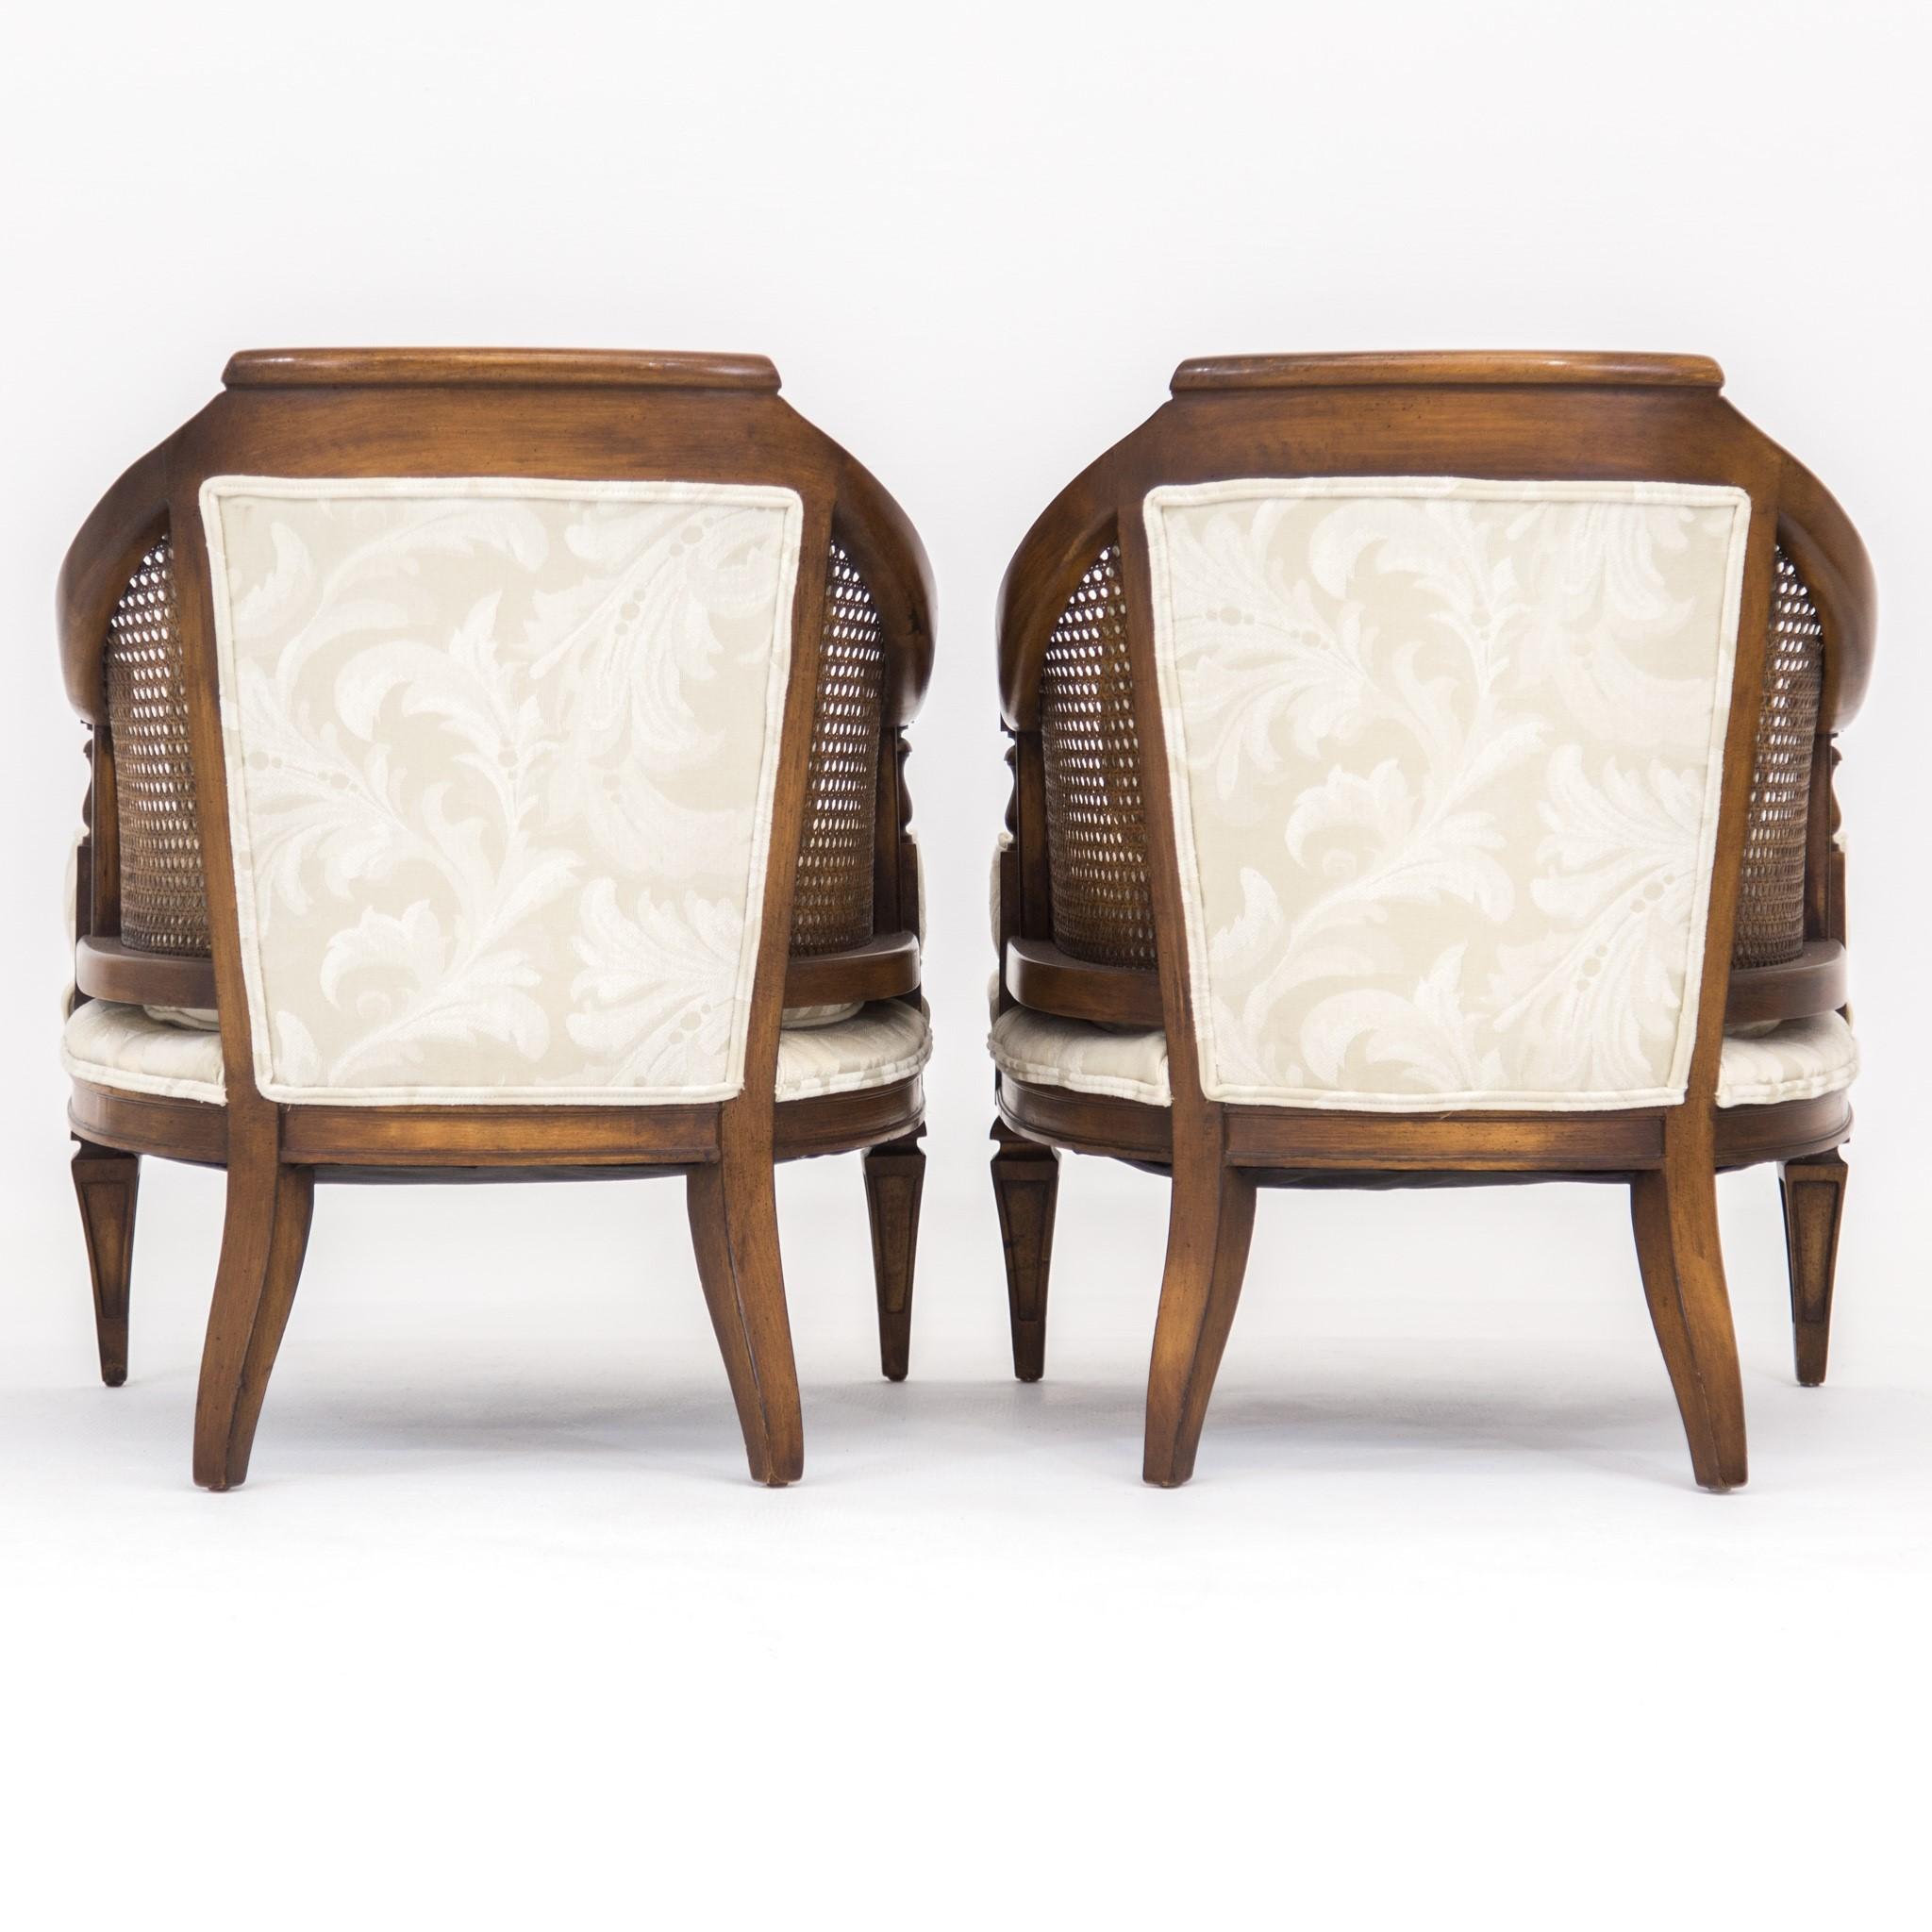 Carved Pair of Mid-Century Walnut & Cane Barrel Back Club Chairs with White Upholstery